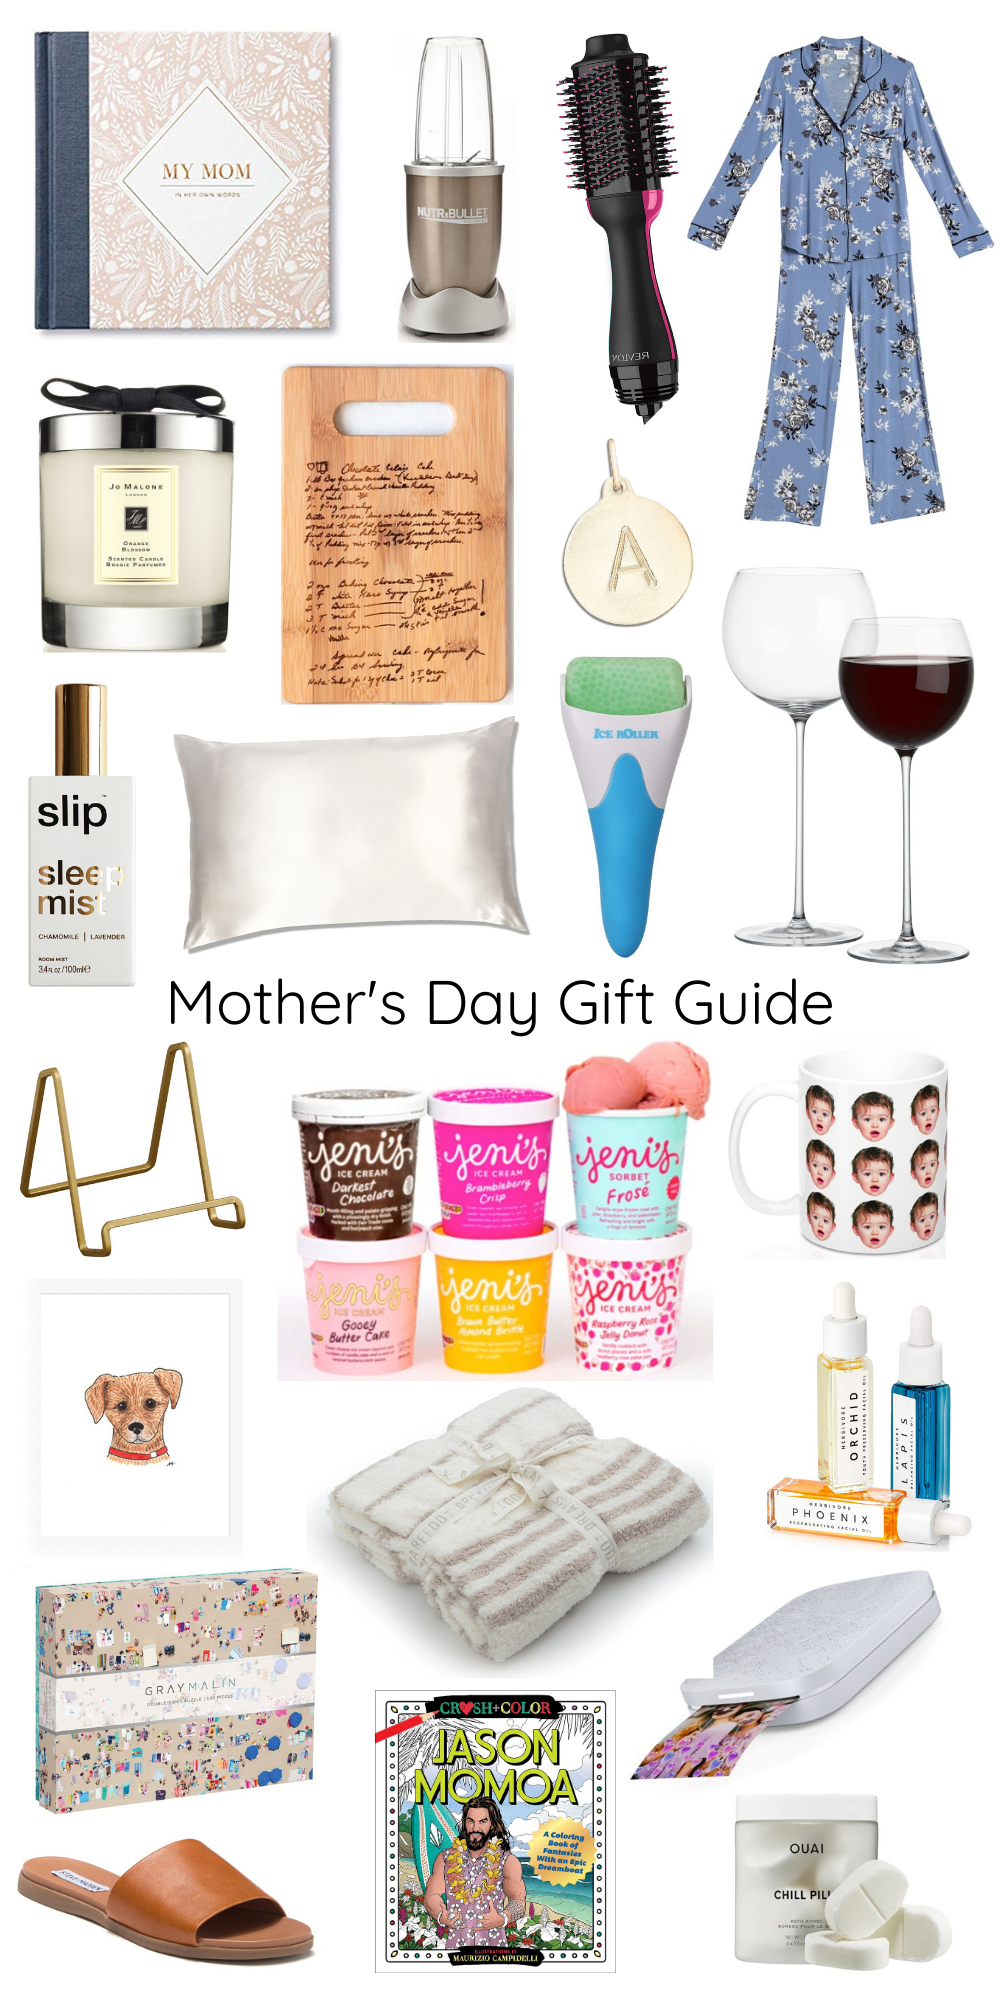 https://www.chloandtell.com/wp-content/uploads/2020/04/Mothers-Day-Gift-Guide.png